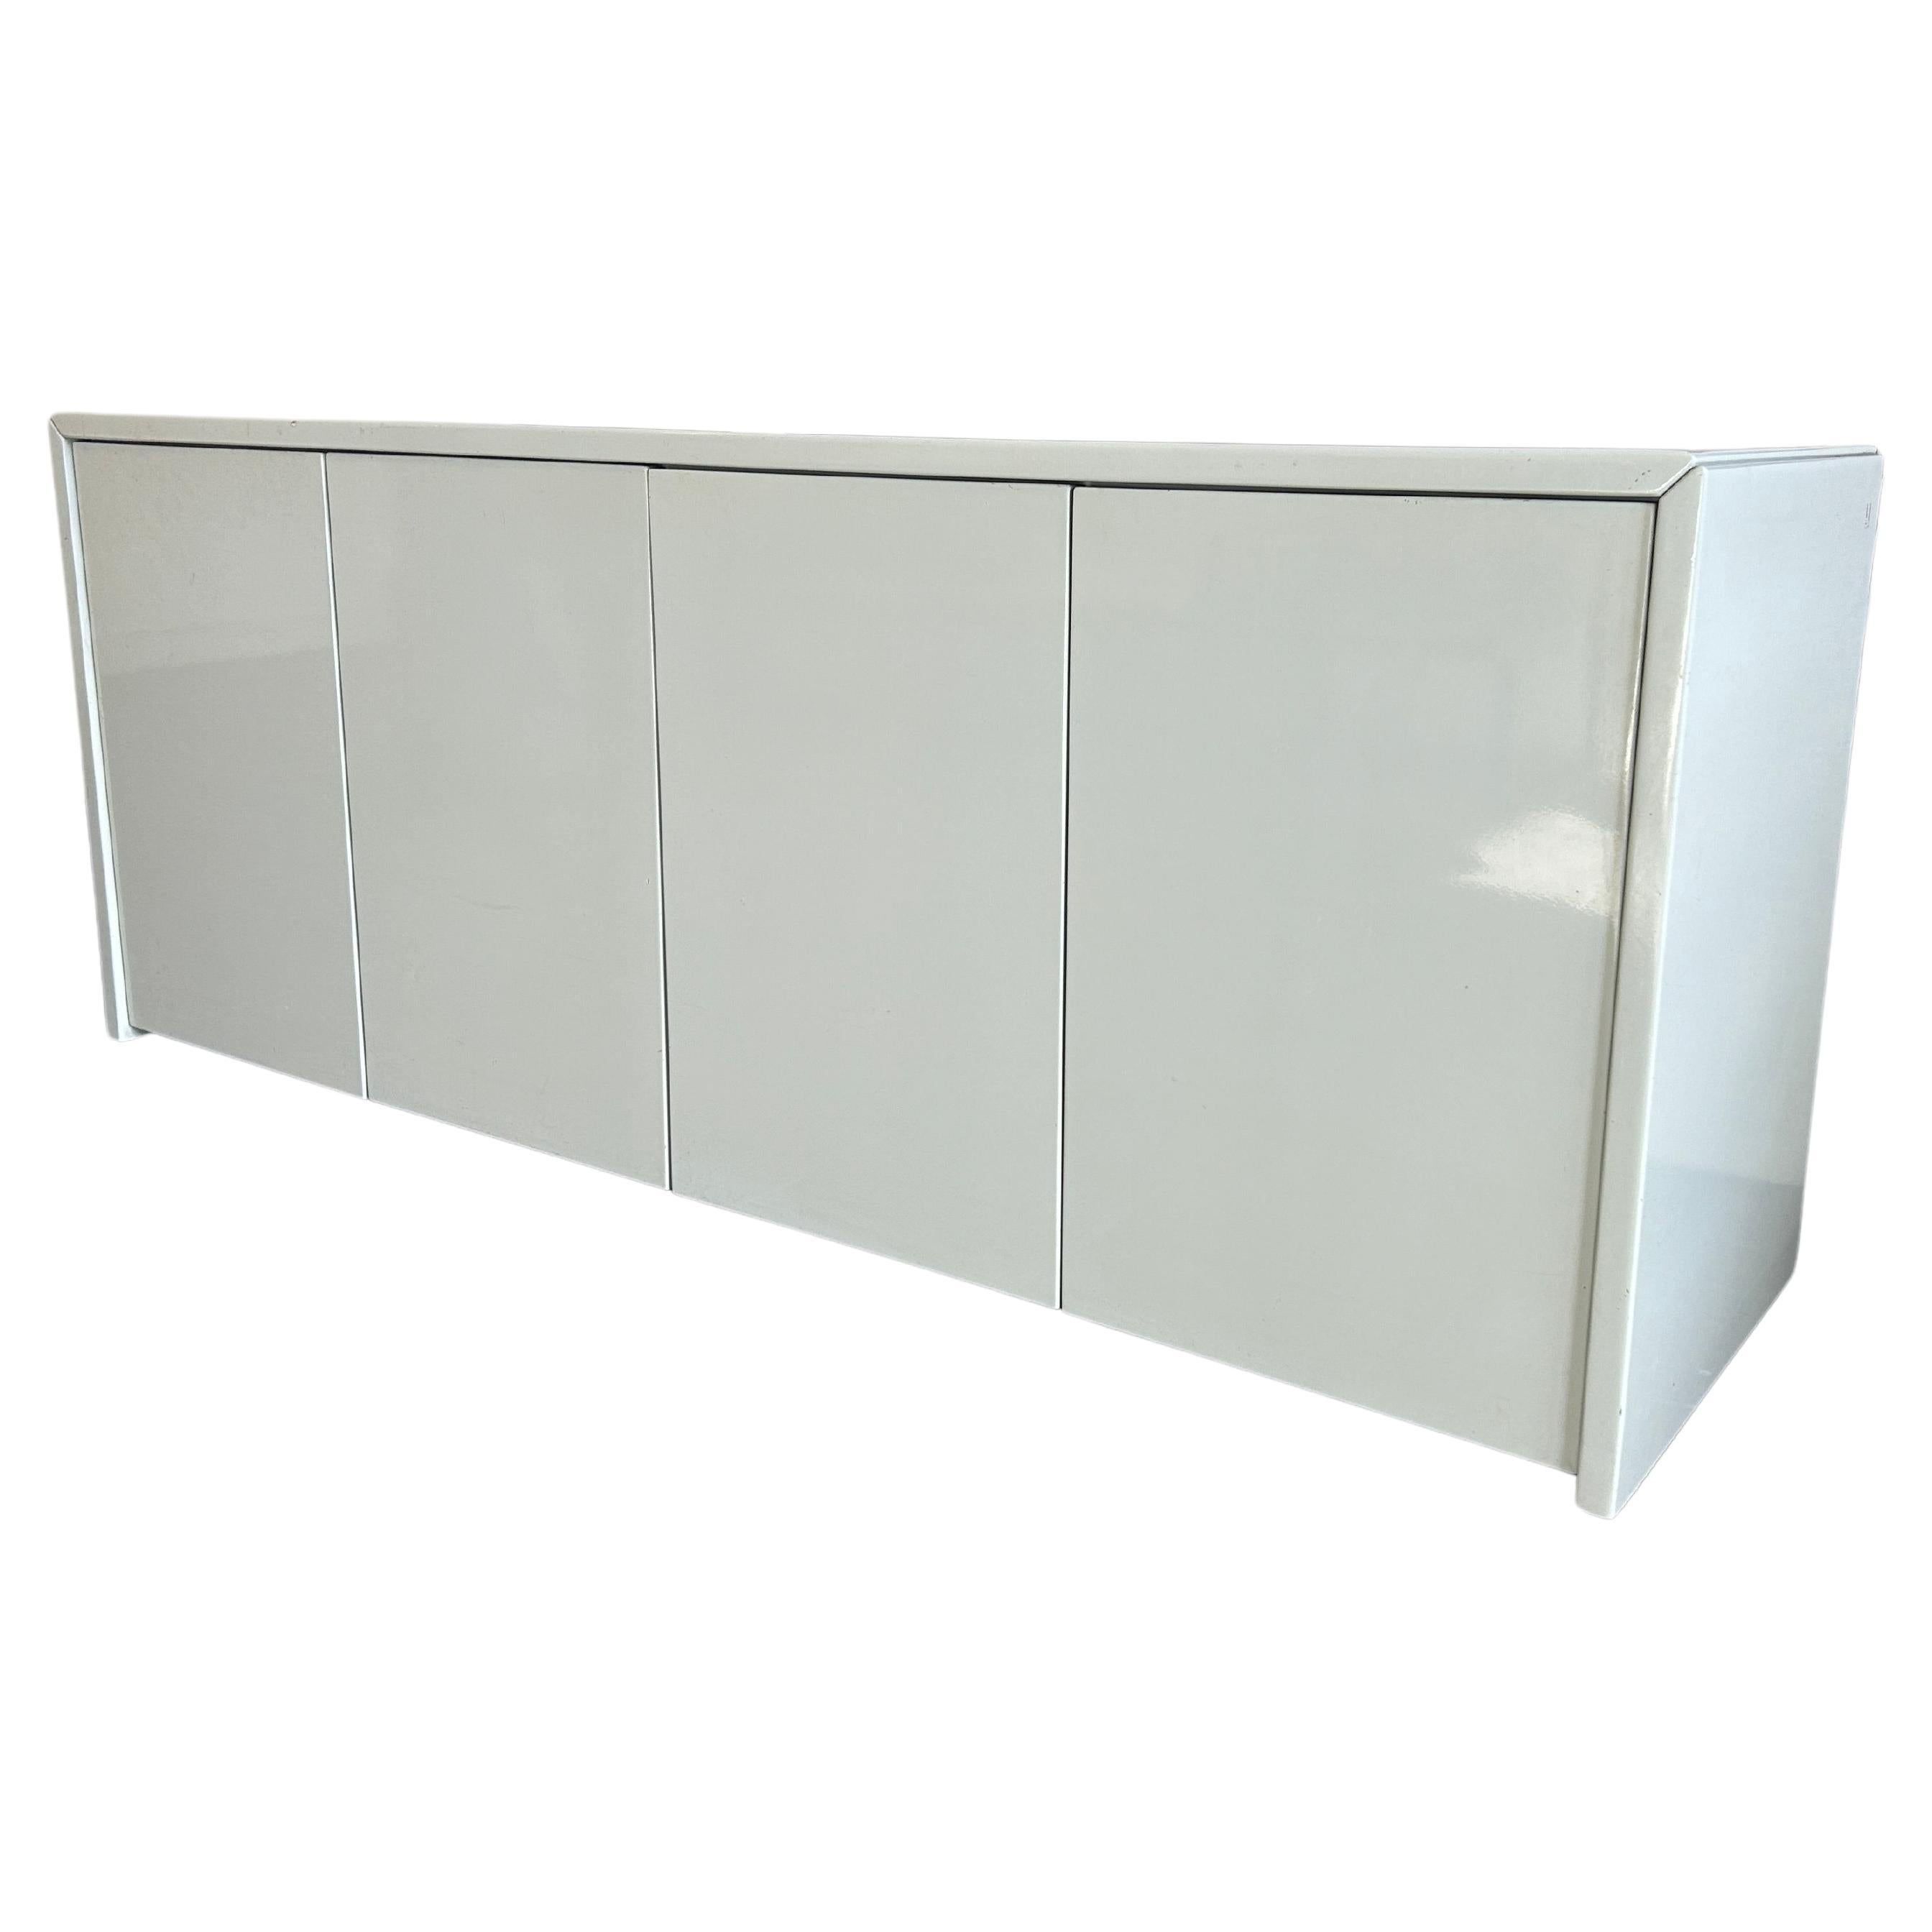 Cabinet crédence 4 portes The Moderns light gray gloss laquer